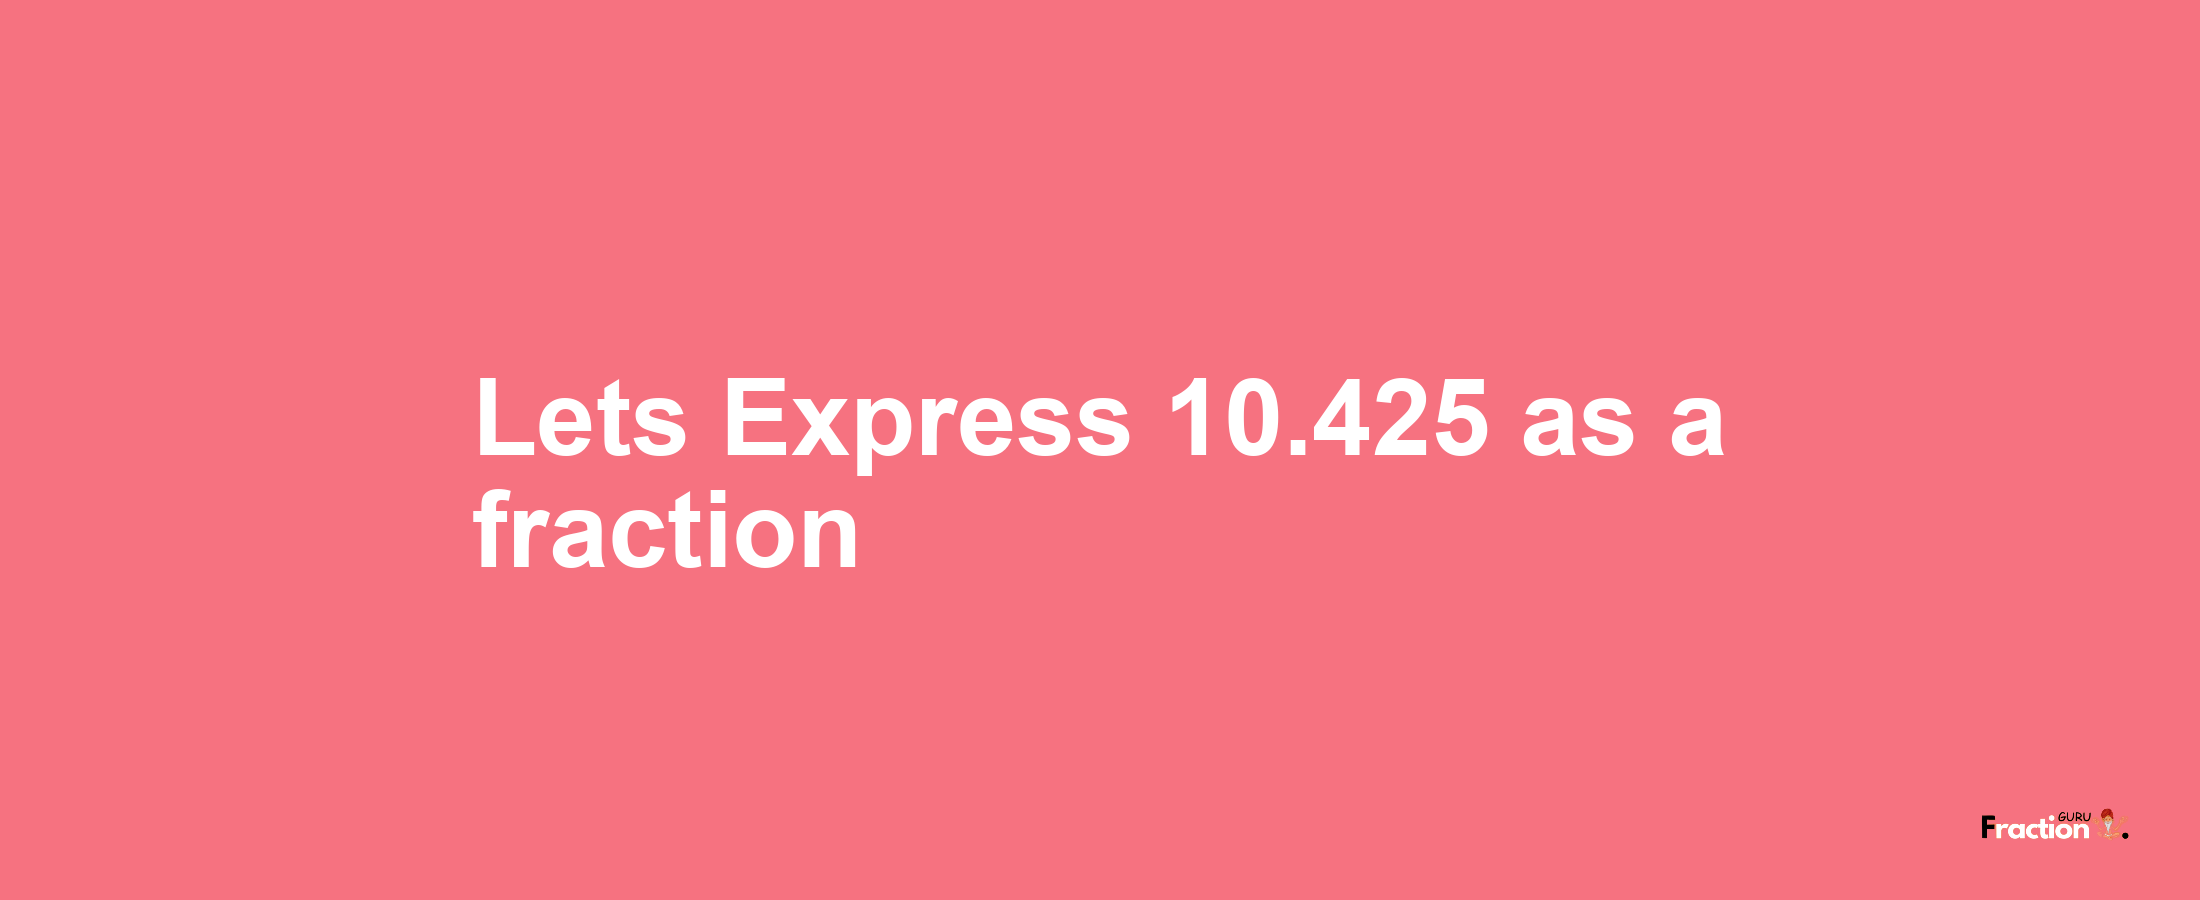 Lets Express 10.425 as afraction